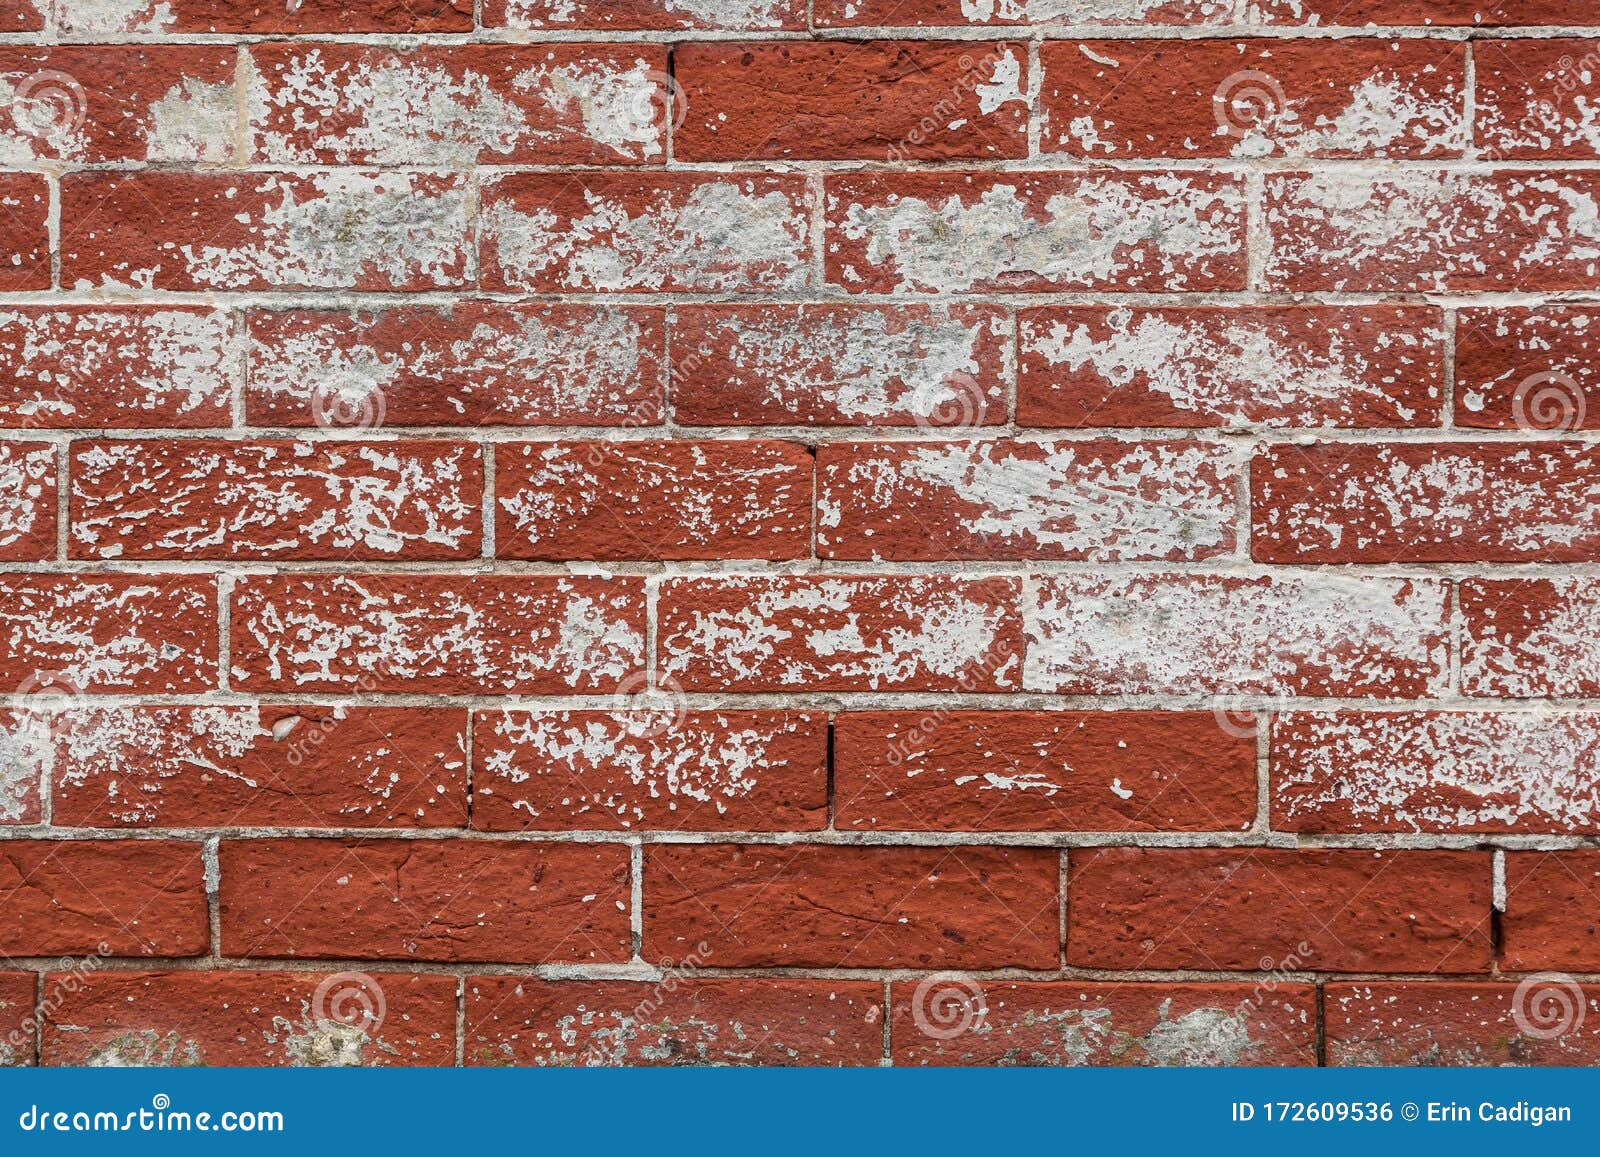 Red Weathered Brick Background with White Paint Spots Stock Photo - Image  of fascade, details: 172609536